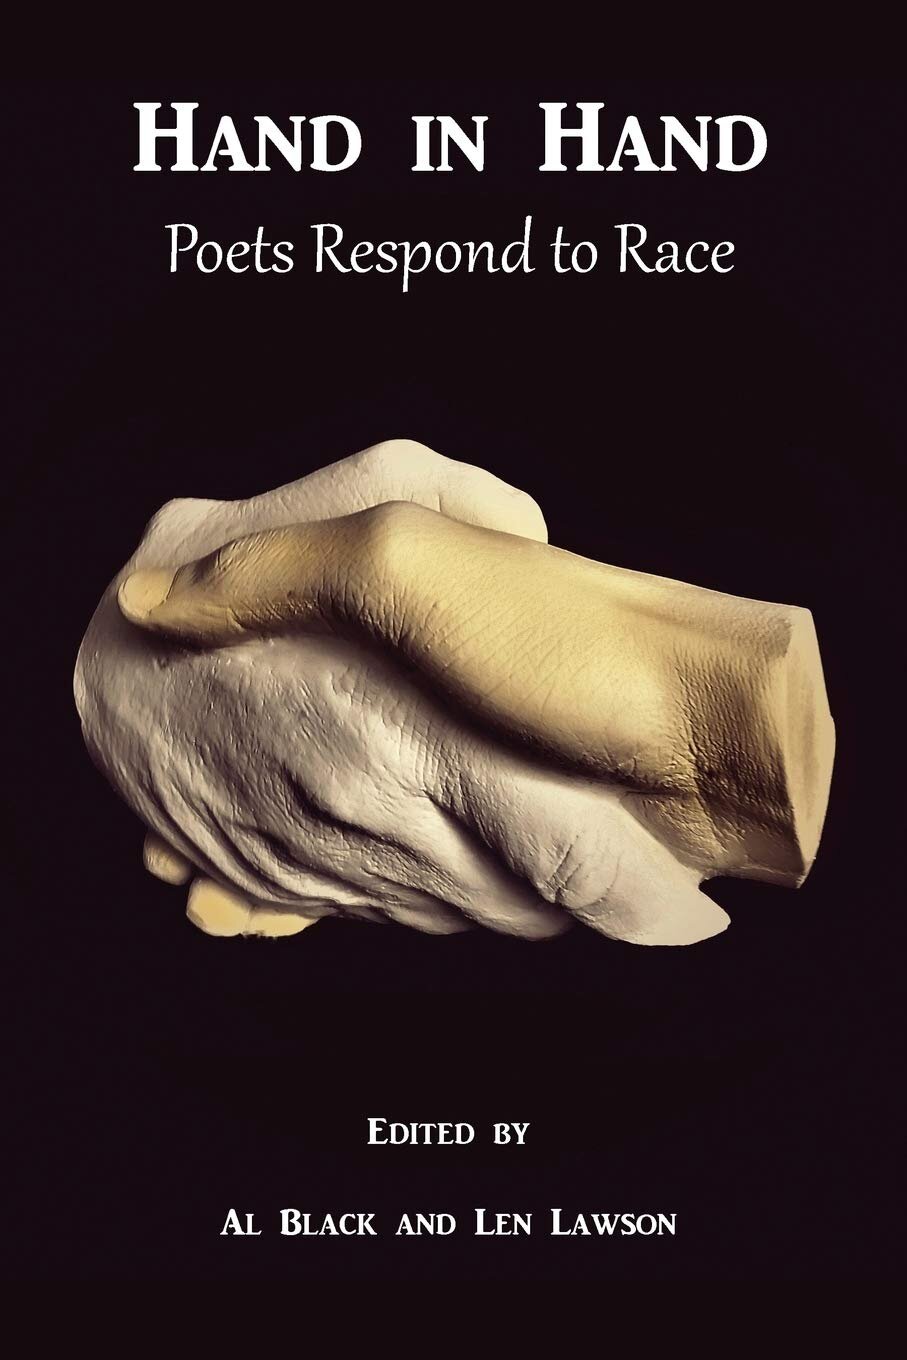 HAND IN HAND: POETS RESPOND TO RACE (MUDDY FORD PRESS, 2017)